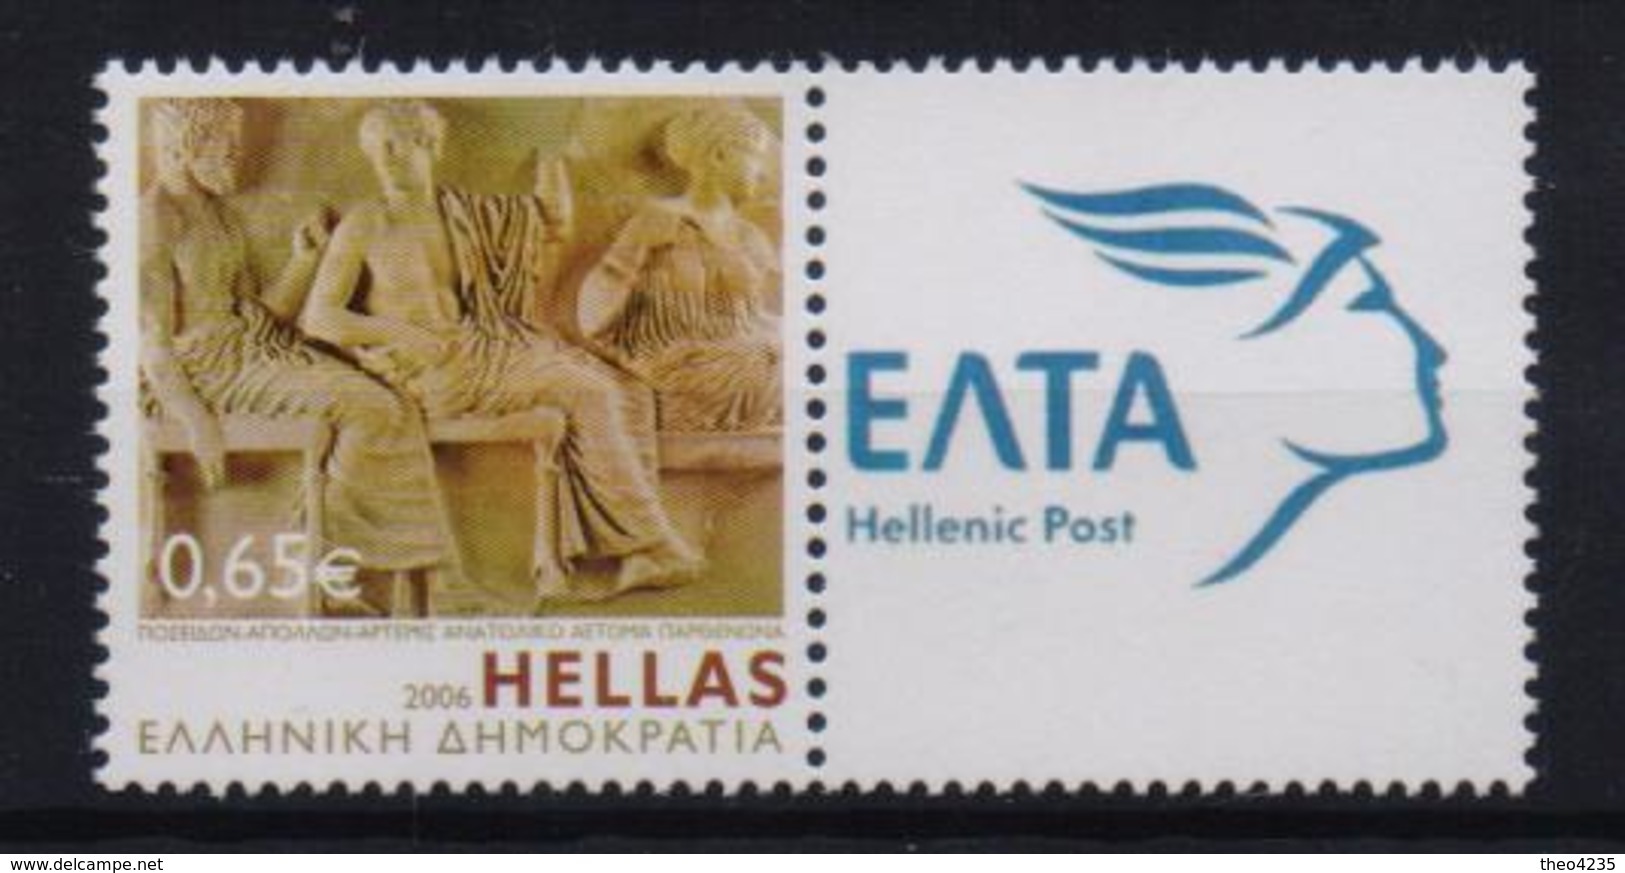 GREECE STAMPS 2006/STAMP WITH ELTA LOGO LABEL/ GREEK MUSEUMS STAMP WITH LABEL  -7/4/06-MNH - Ungebraucht